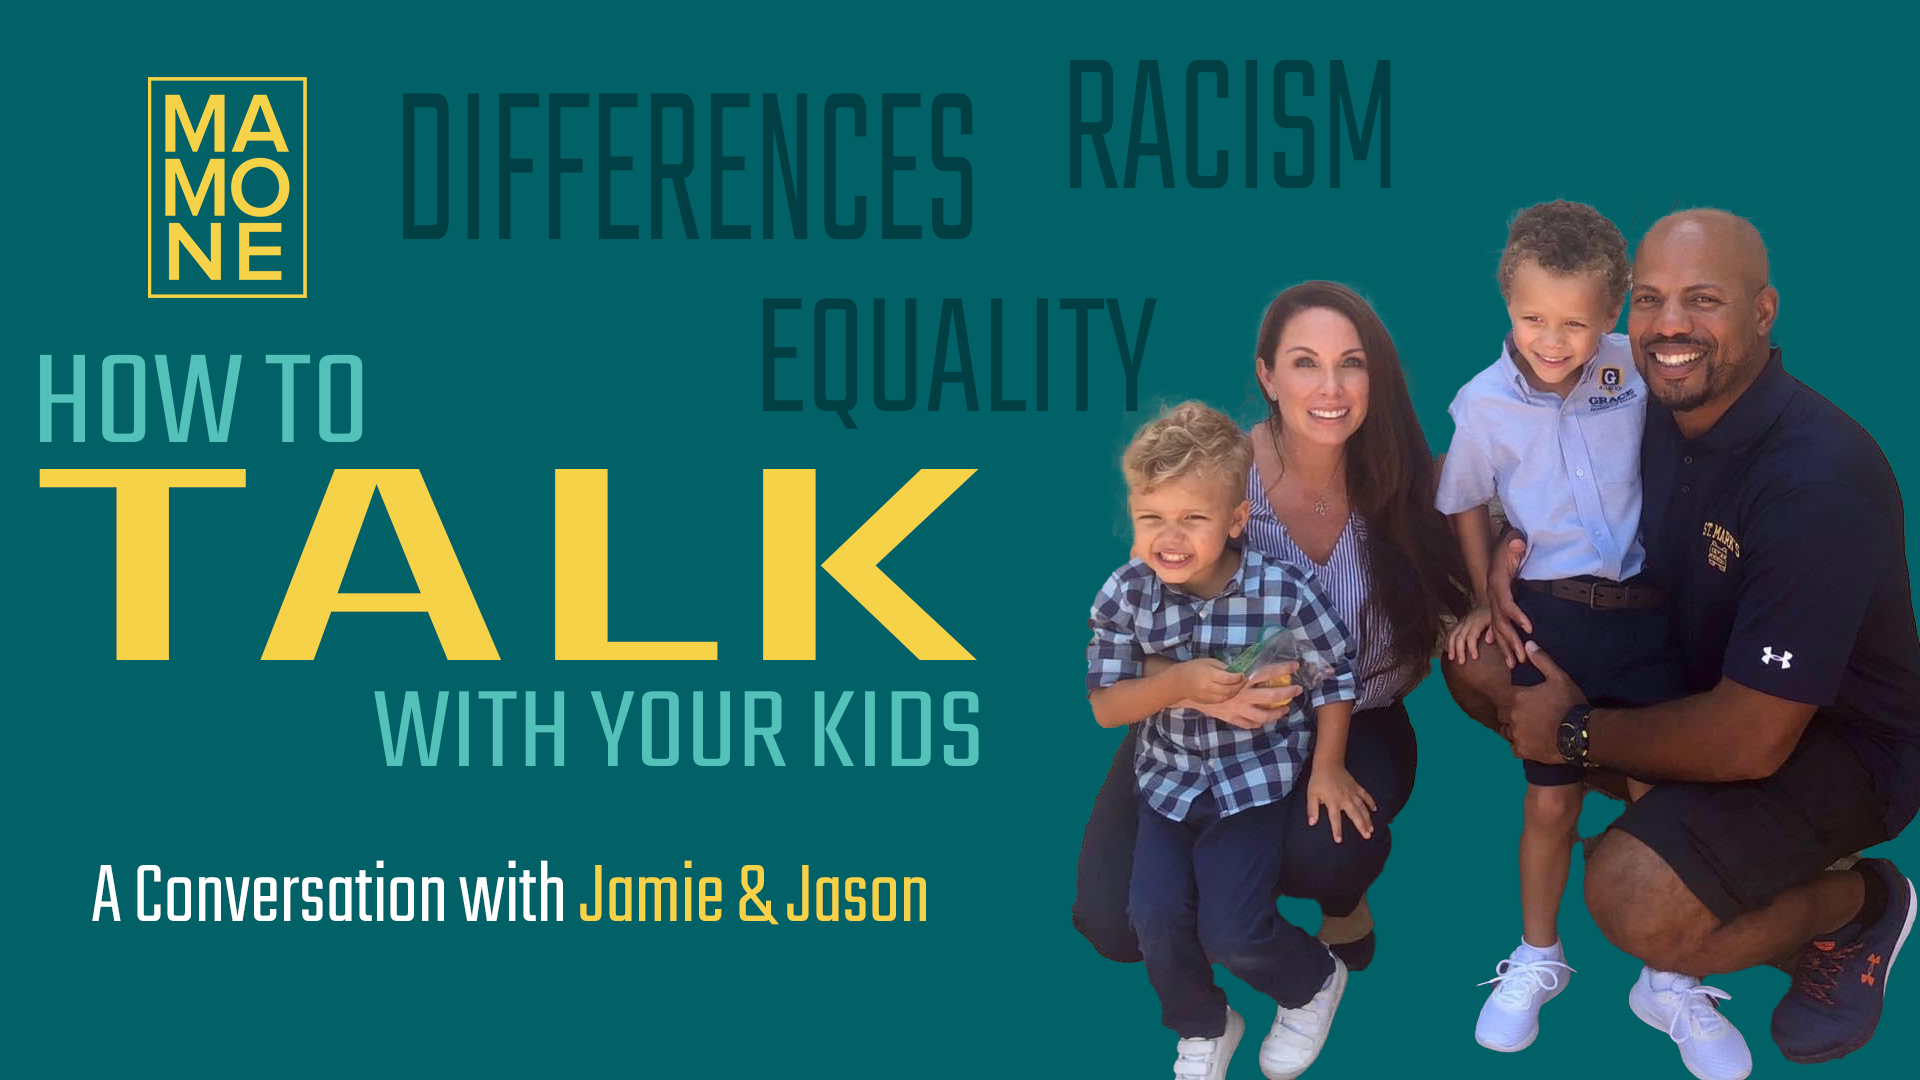 How To Talk with Your Kids About Racism